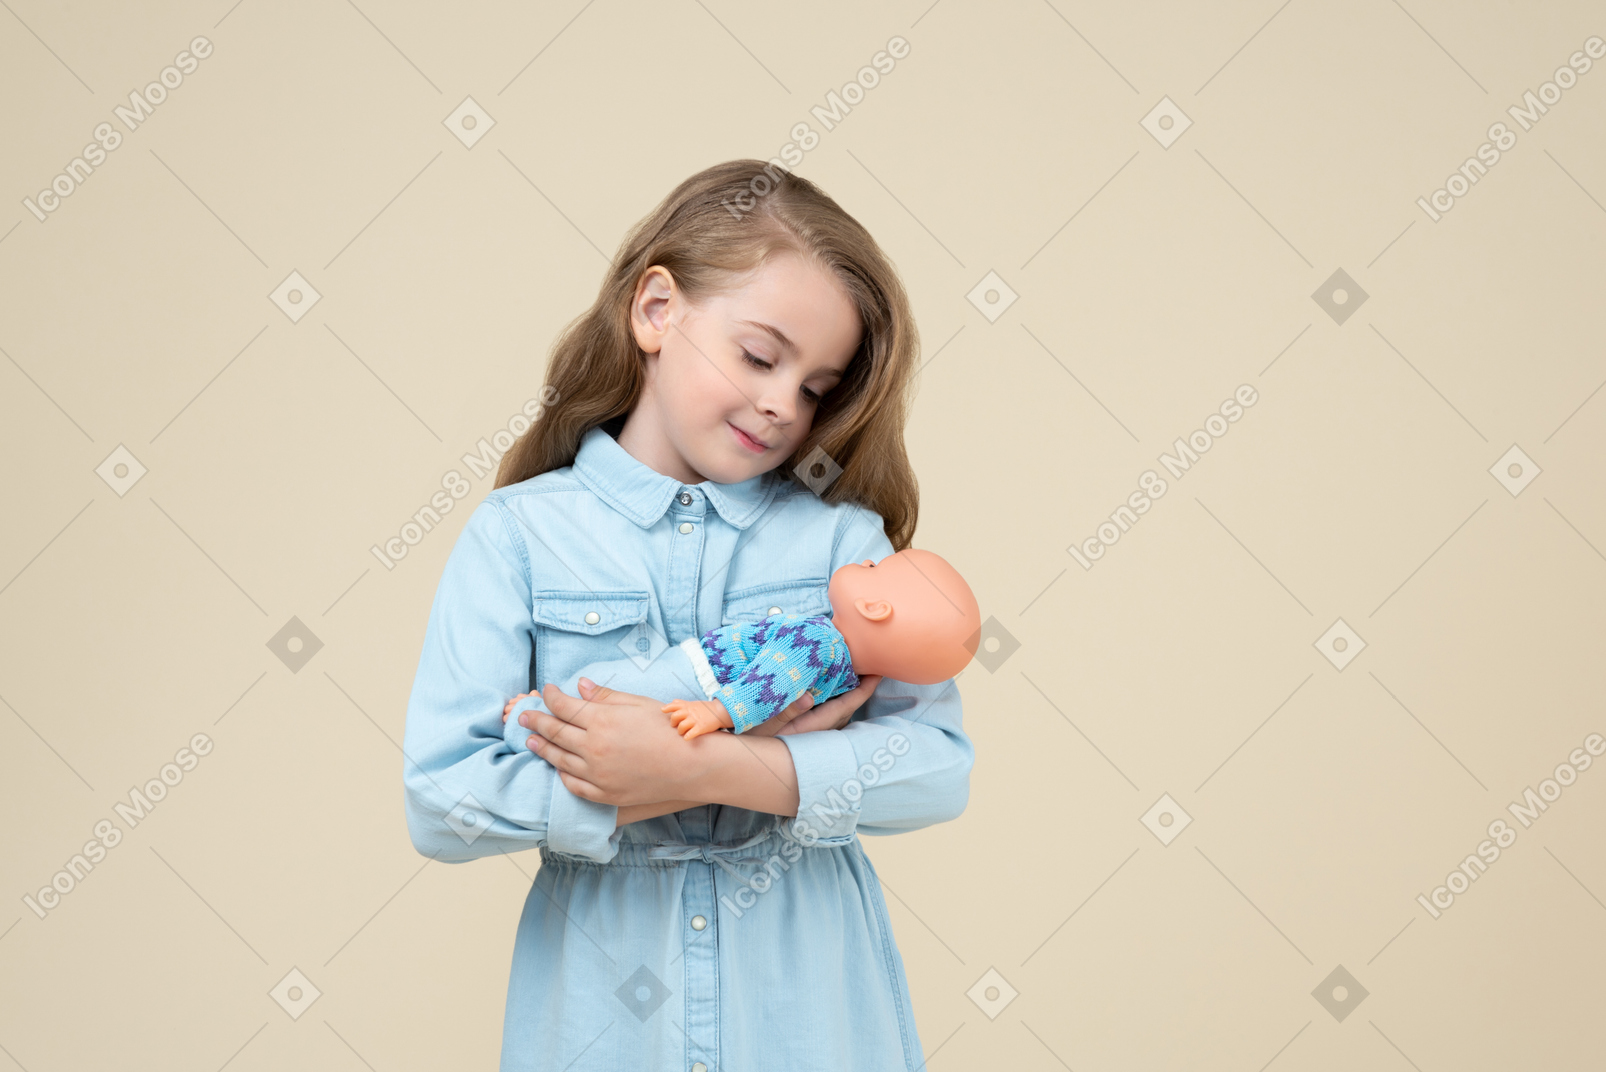 Cute little girl holding a baby doll